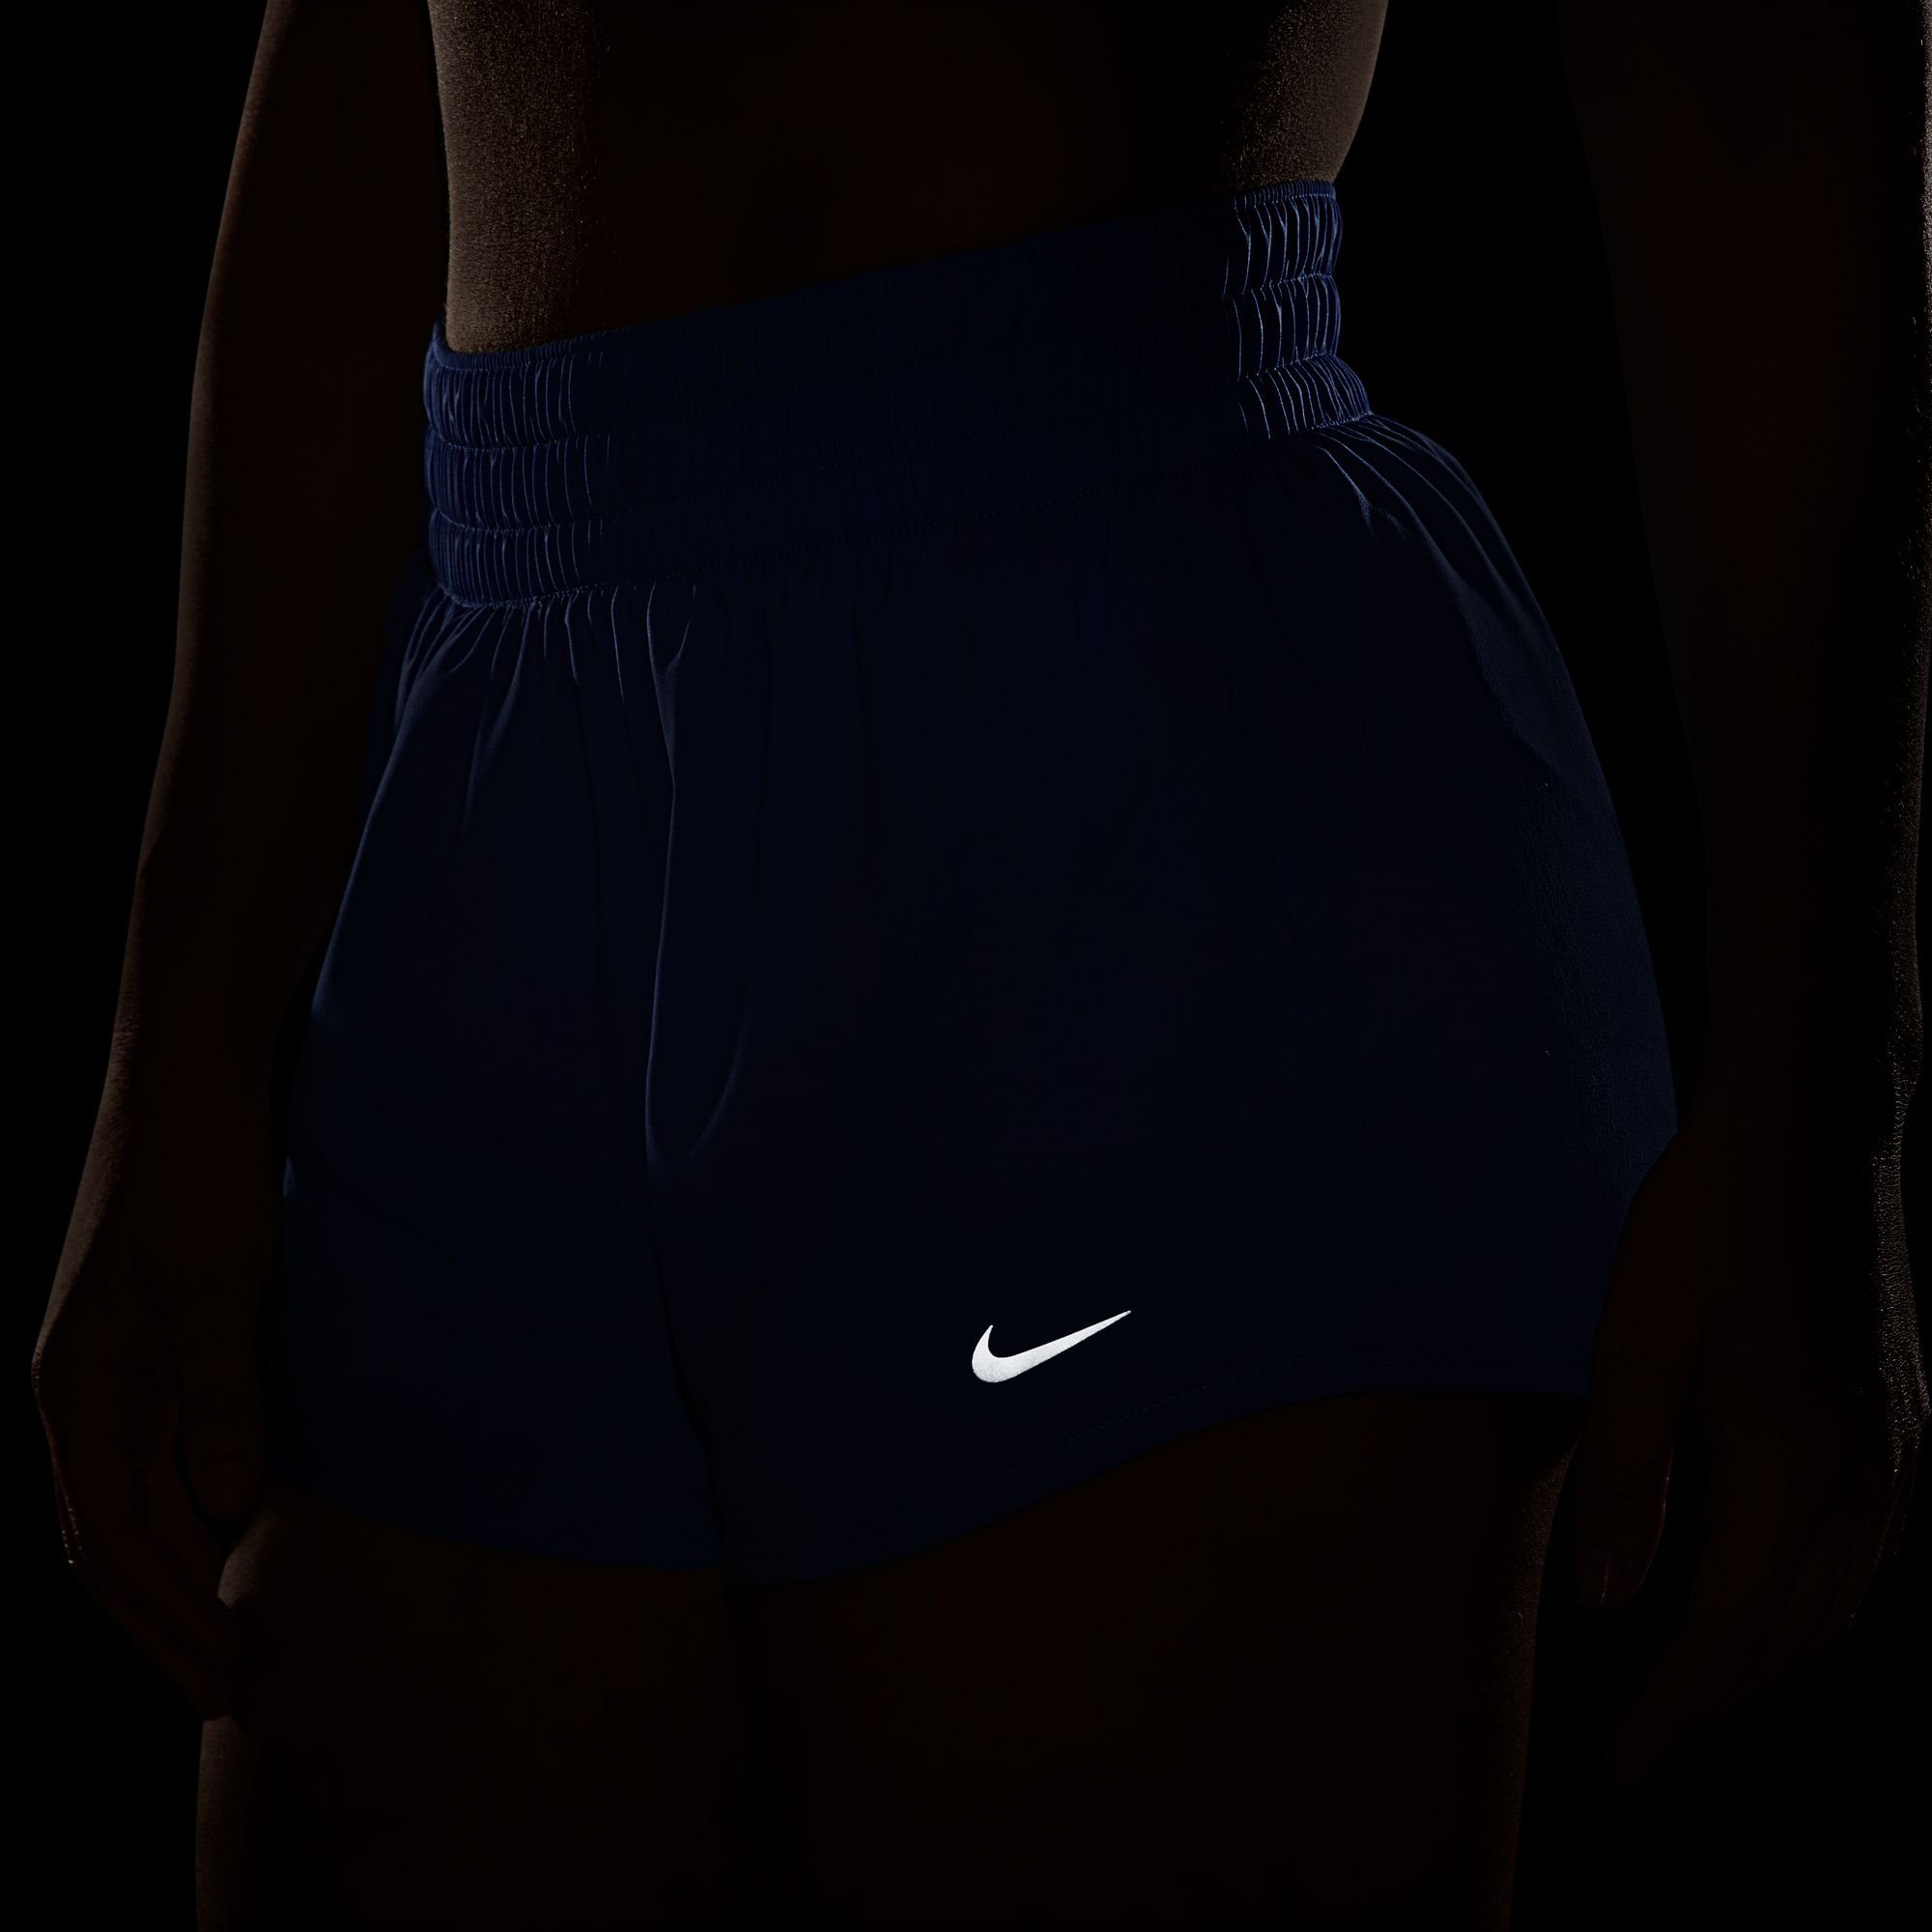 POLAR/REFLECTIVE ONE BRIEF-LINED Trainingsshorts Nike SHORTS DRI-FIT MID-RISE WOMEN'S SILV